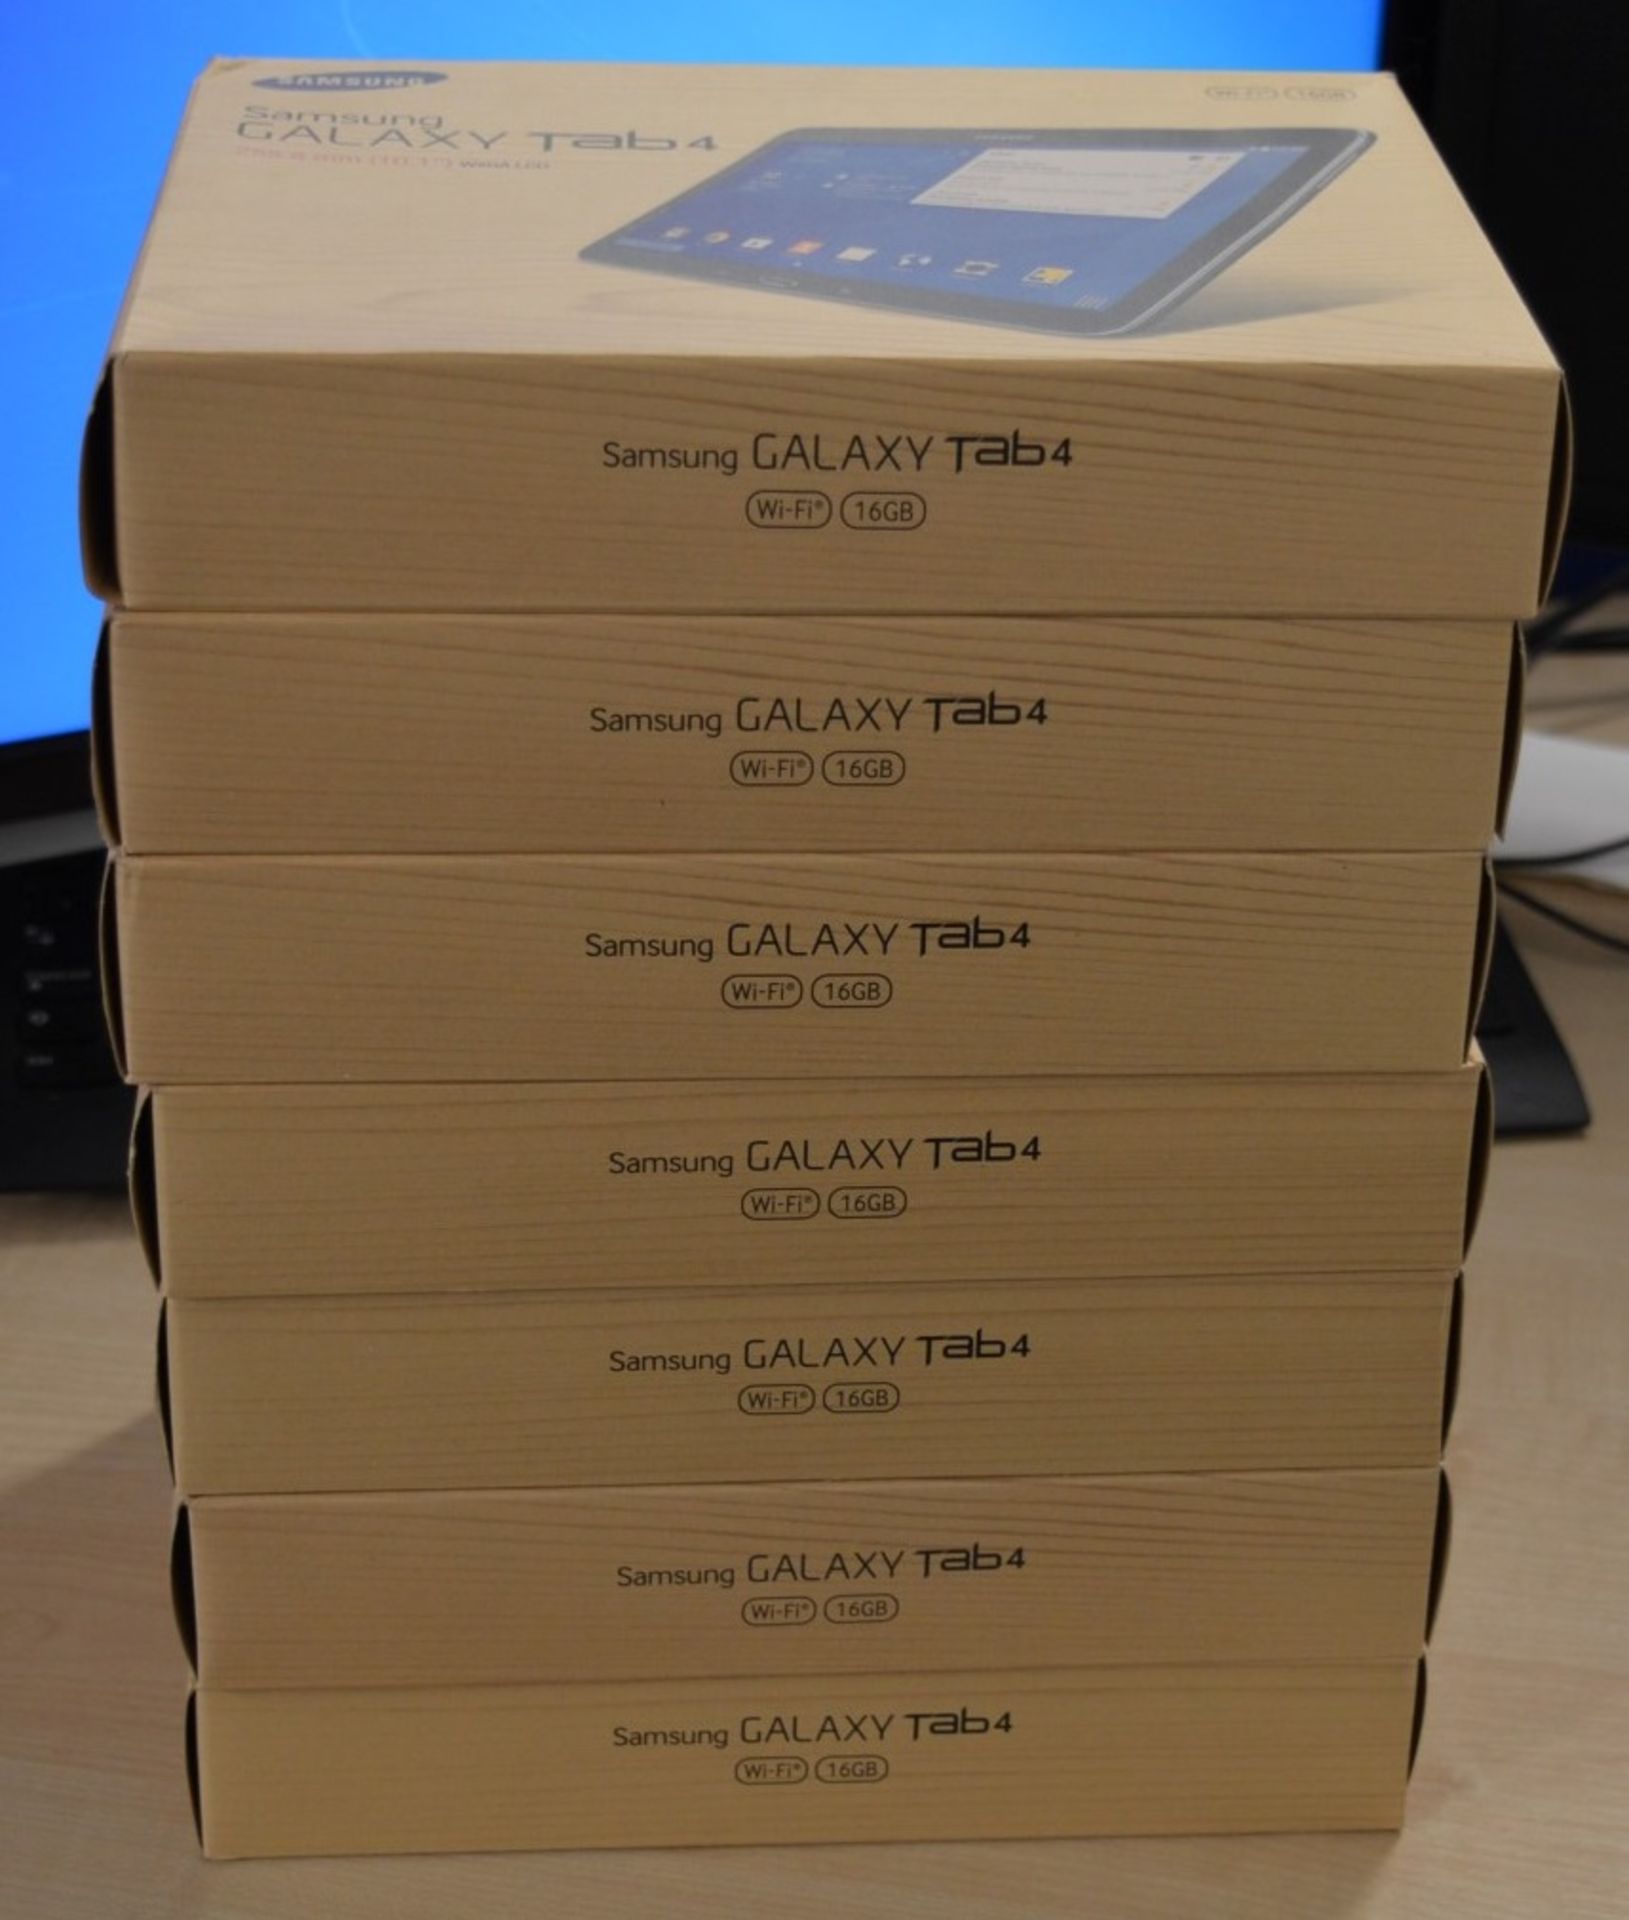 7 x Empty Samsung Galaxy Tab4 Table Retail Boxes - CL300 - Ref CAT113 - Empty Boxes May Have Some In - Image 6 of 6